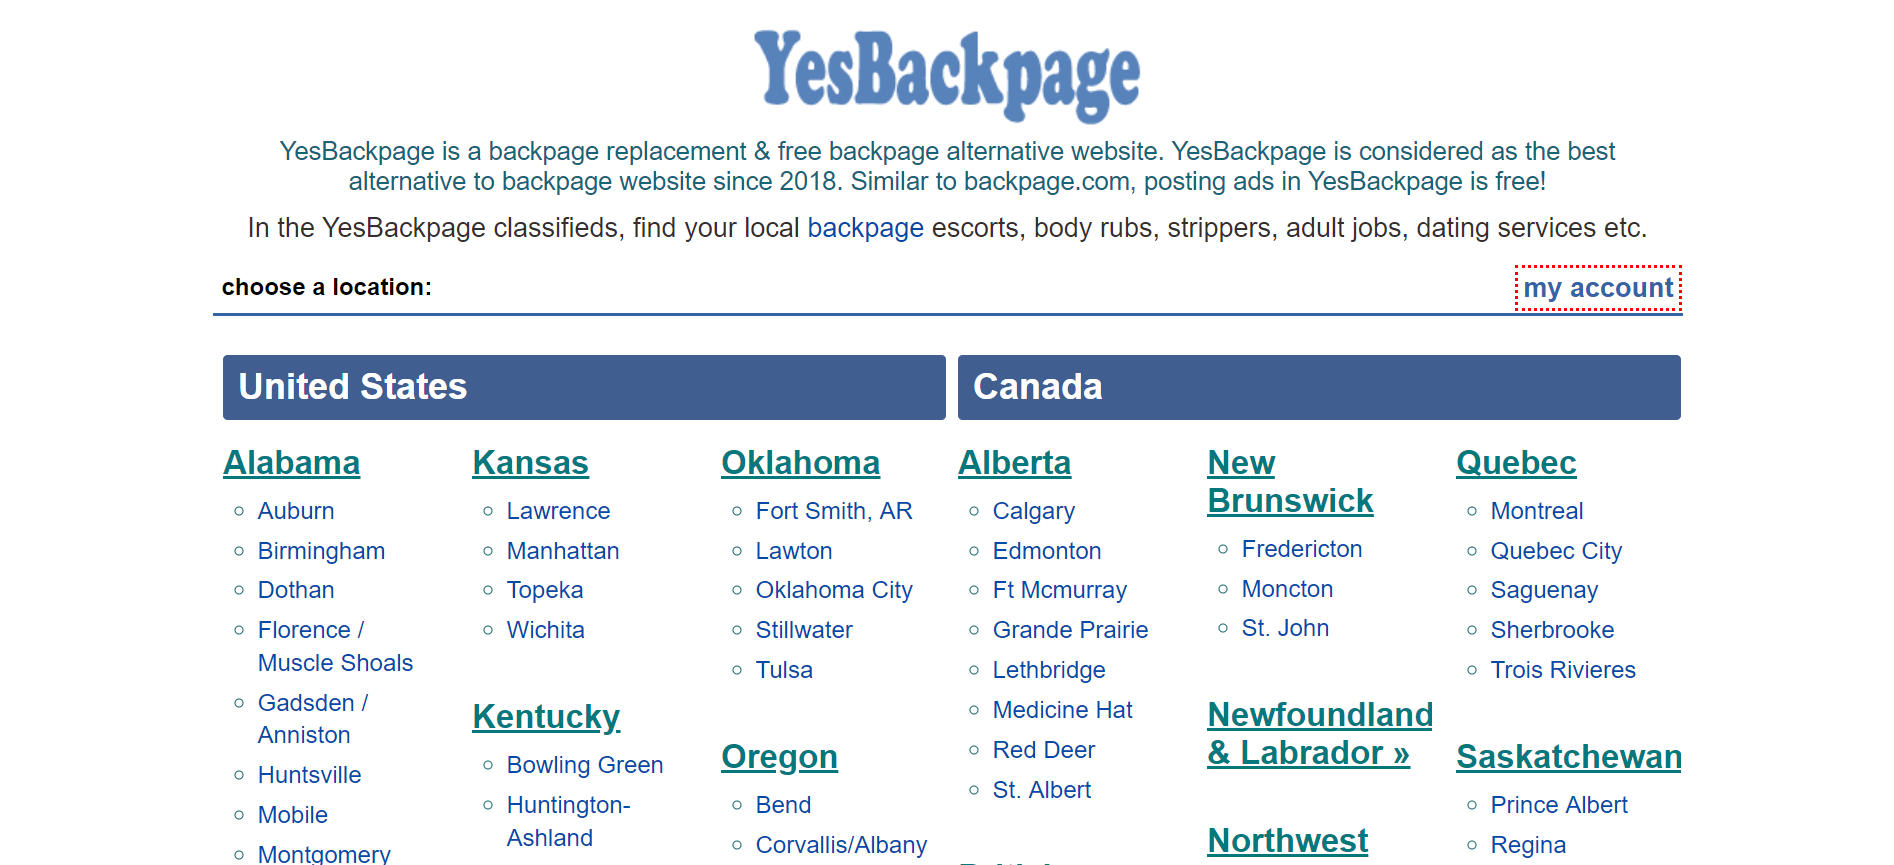 Yesbackpage united states list